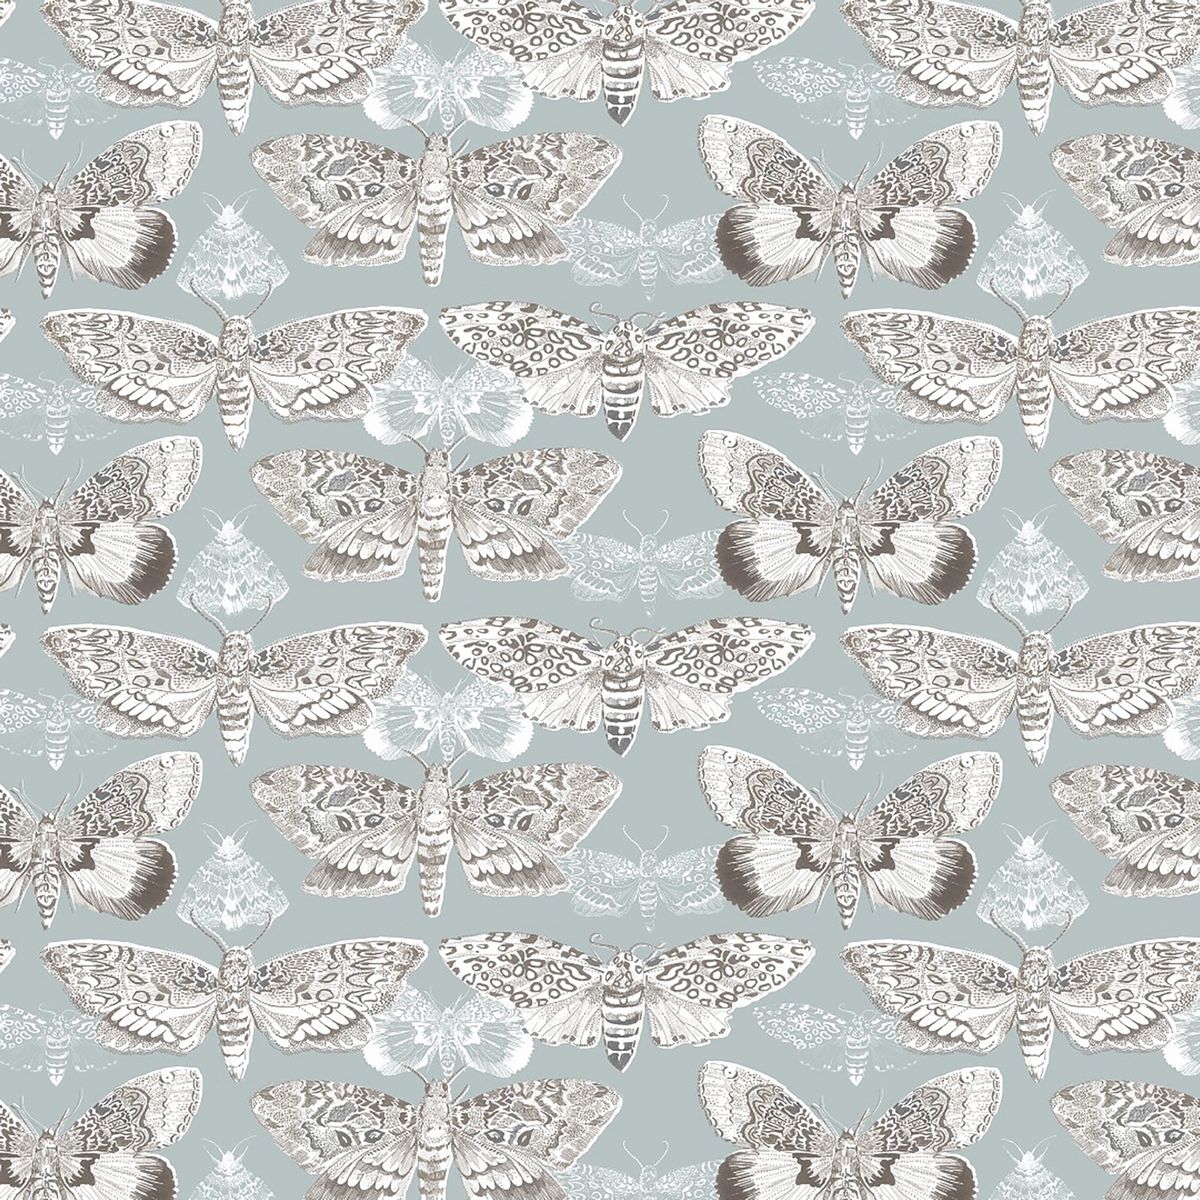 Nocturnal Duck Egg Fabric by Voyage Maison